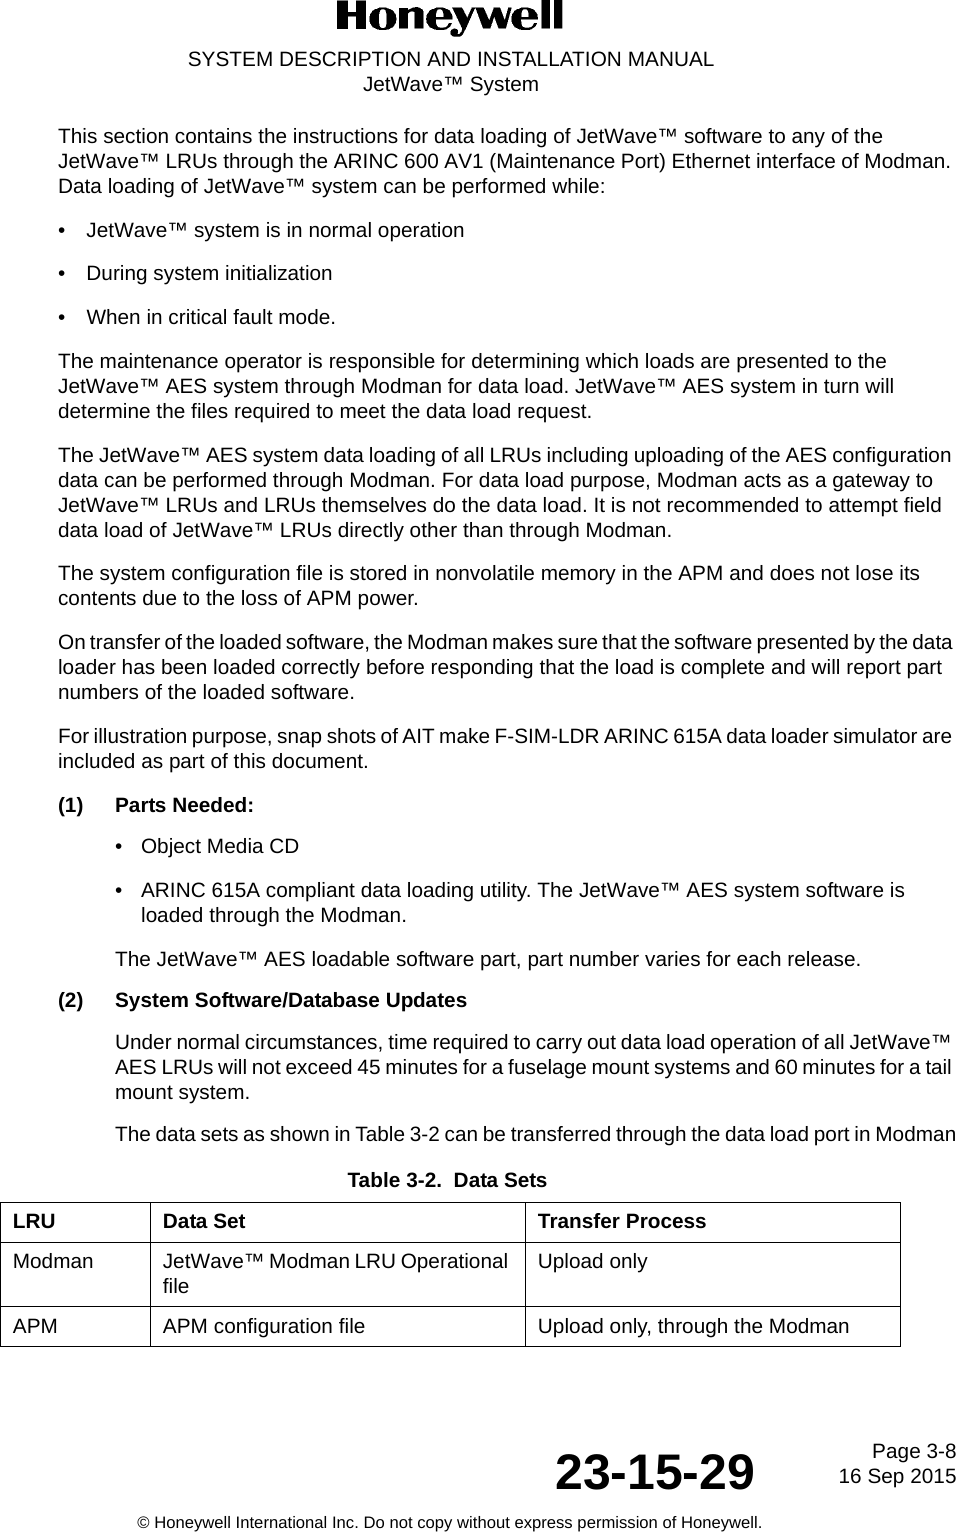 Page 3-816 Sep 201523-15-29SYSTEM DESCRIPTION AND INSTALLATION MANUALJetWave™ System© Honeywell International Inc. Do not copy without express permission of Honeywell.This section contains the instructions for data loading of JetWave™ software to any of the JetWave™ LRUs through the ARINC 600 AV1 (Maintenance Port) Ethernet interface of Modman. Data loading of JetWave™ system can be performed while:• JetWave™ system is in normal operation  • During system initialization • When in critical fault mode. The maintenance operator is responsible for determining which loads are presented to the JetWave™ AES system through Modman for data load. JetWave™ AES system in turn will determine the files required to meet the data load request. The JetWave™ AES system data loading of all LRUs including uploading of the AES configuration data can be performed through Modman. For data load purpose, Modman acts as a gateway to JetWave™ LRUs and LRUs themselves do the data load. It is not recommended to attempt field data load of JetWave™ LRUs directly other than through Modman. The system configuration file is stored in nonvolatile memory in the APM and does not lose its contents due to the loss of APM power. On transfer of the loaded software, the Modman makes sure that the software presented by the data loader has been loaded correctly before responding that the load is complete and will report part numbers of the loaded software. For illustration purpose, snap shots of AIT make F-SIM-LDR ARINC 615A data loader simulator are included as part of this document. (1) Parts Needed:• Object Media CD • ARINC 615A compliant data loading utility. The JetWave™ AES system software is loaded through the Modman. The JetWave™ AES loadable software part, part number varies for each release. (2) System Software/Database UpdatesUnder normal circumstances, time required to carry out data load operation of all JetWave™ AES LRUs will not exceed 45 minutes for a fuselage mount systems and 60 minutes for a tail mount system. The data sets as shown in Table 3-2 can be transferred through the data load port in Modman:Table 3-2.  Data SetsLRU Data Set Transfer ProcessModman JetWave™ Modman LRU Operational file Upload onlyAPM APM configuration file Upload only, through the Modman